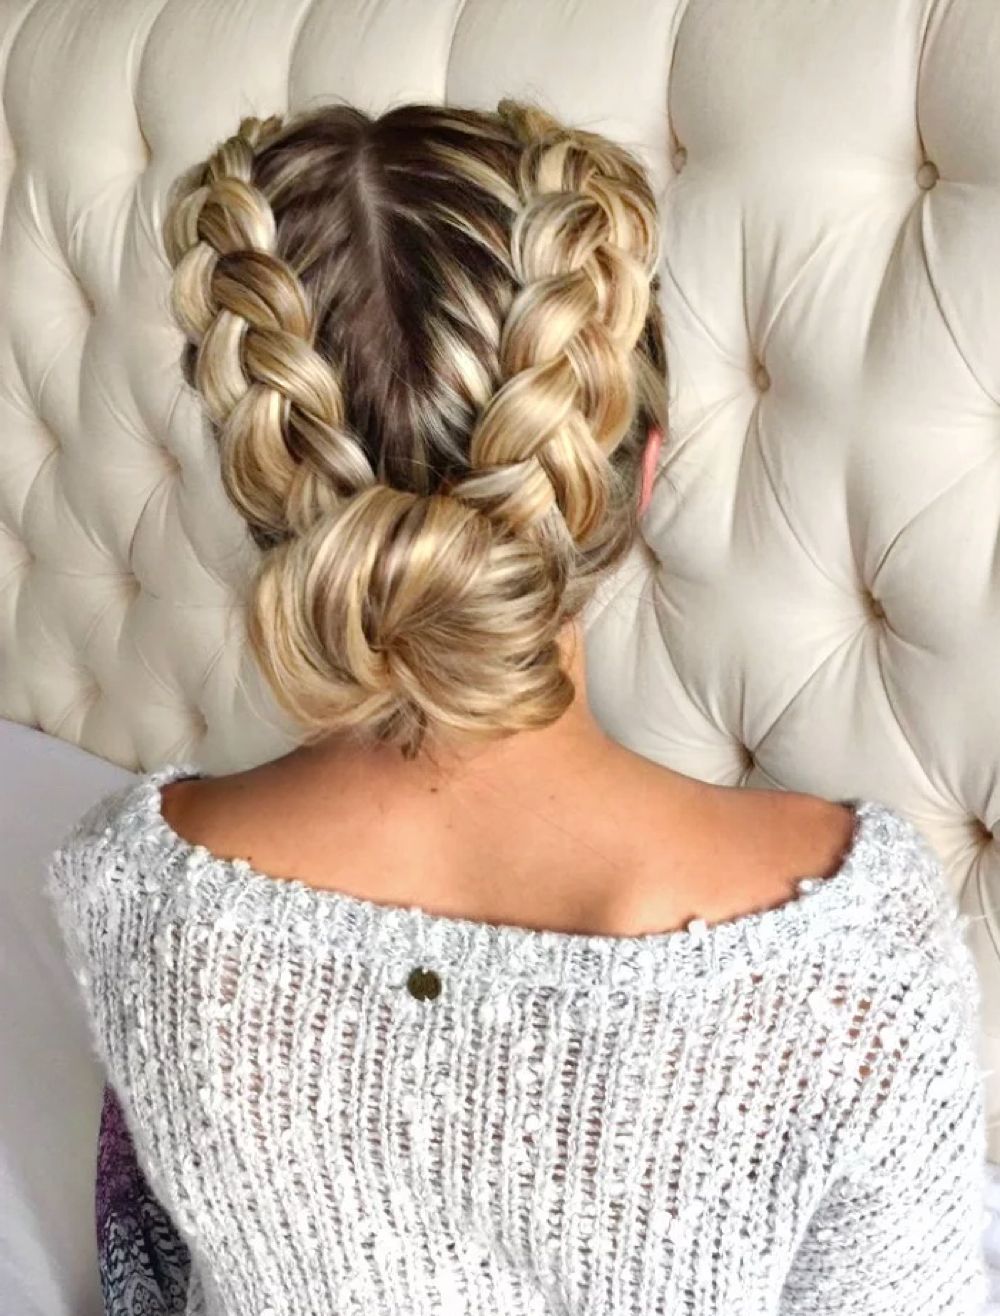 29 Gorgeous Braided Updos For Every Occasion In 2020 Within Widely Used Plaited Low Bun Braid Hairstyles (View 11 of 20)